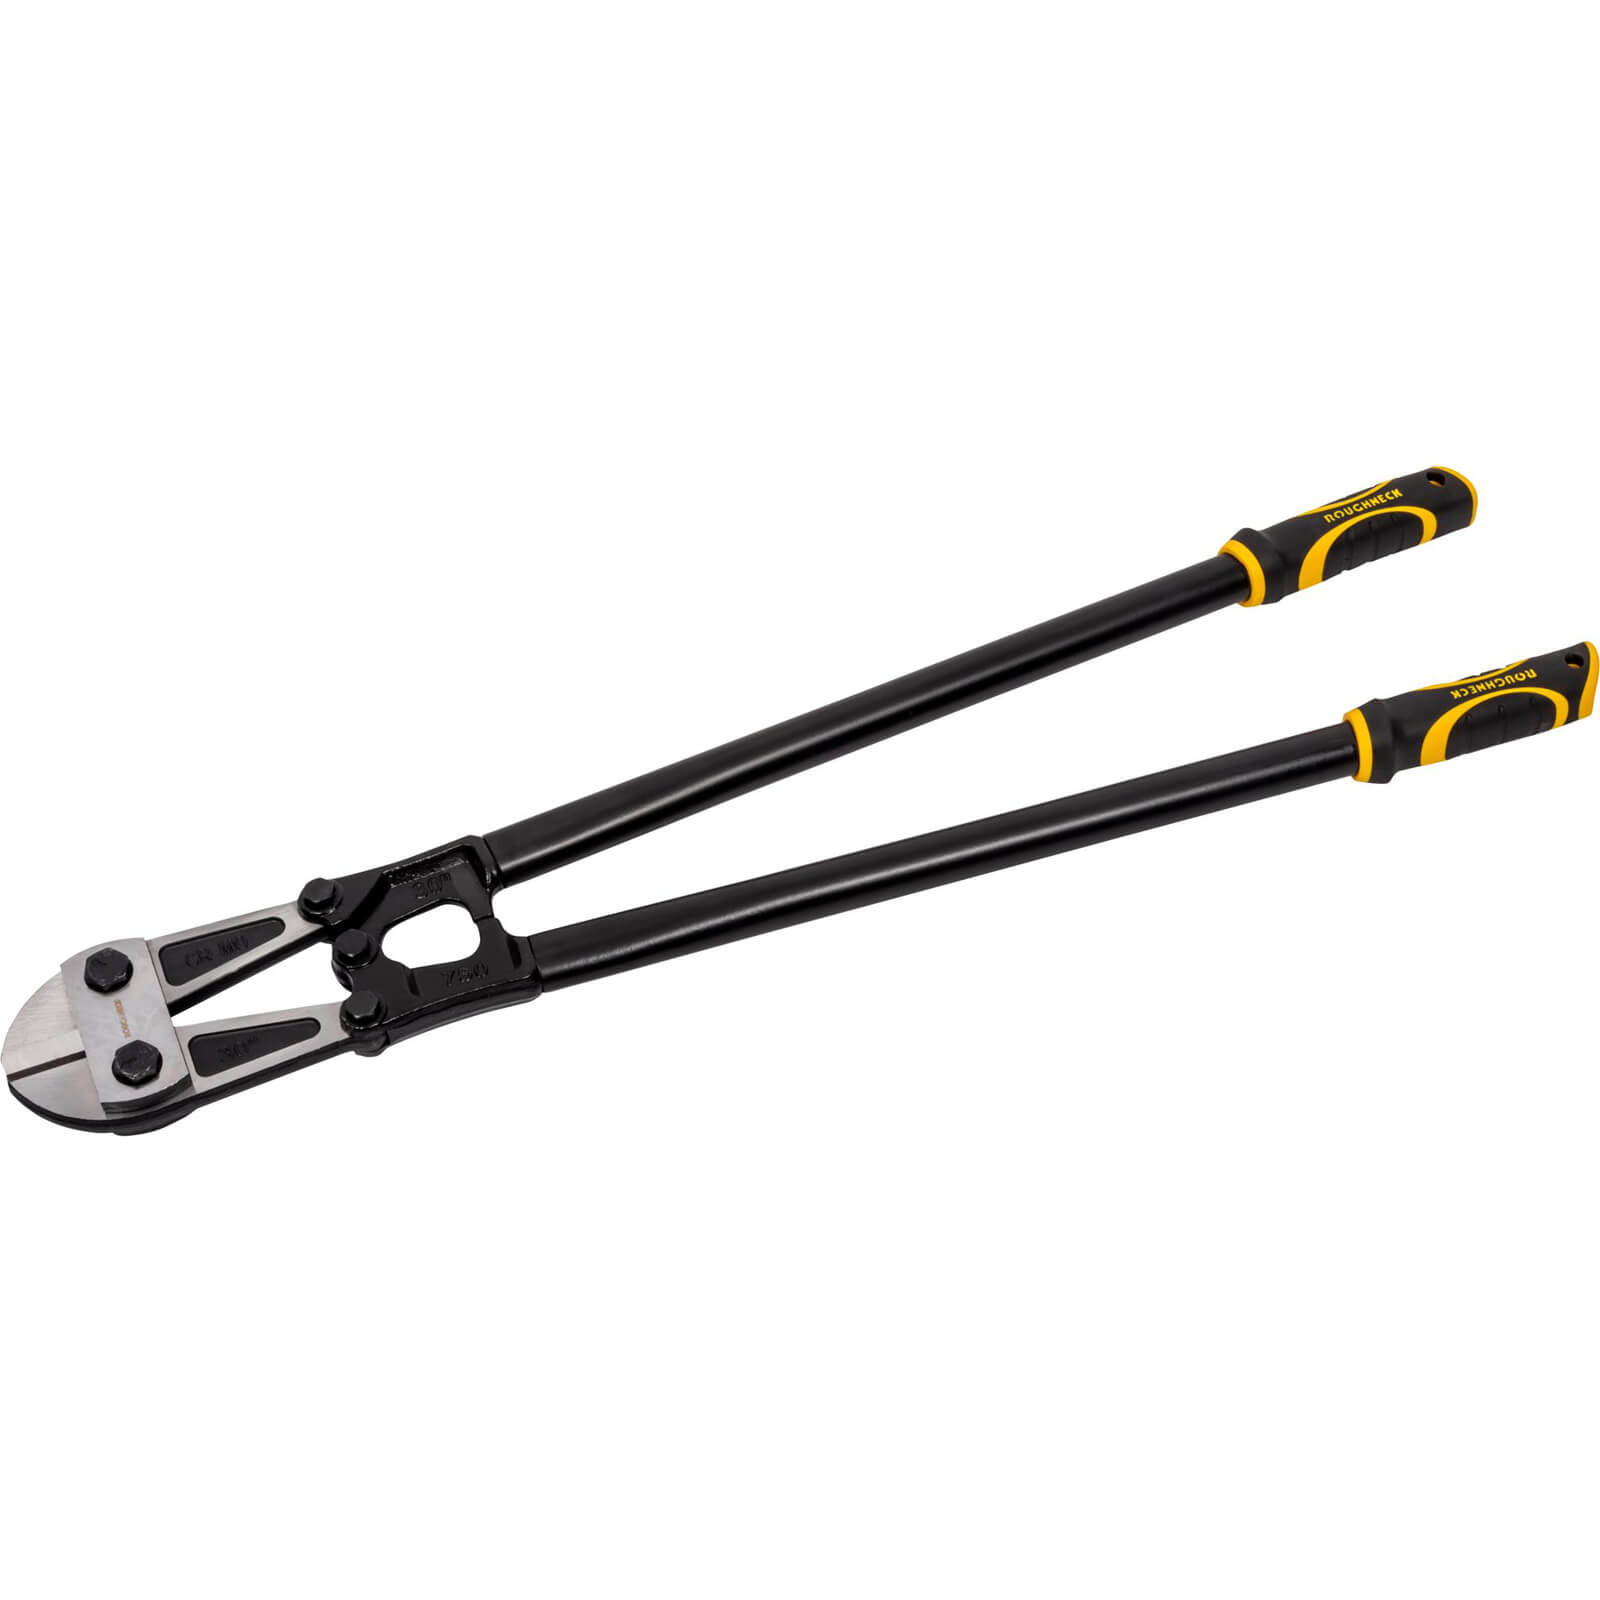 Photo of Roughneck Professional Bolt Cutters 750mm